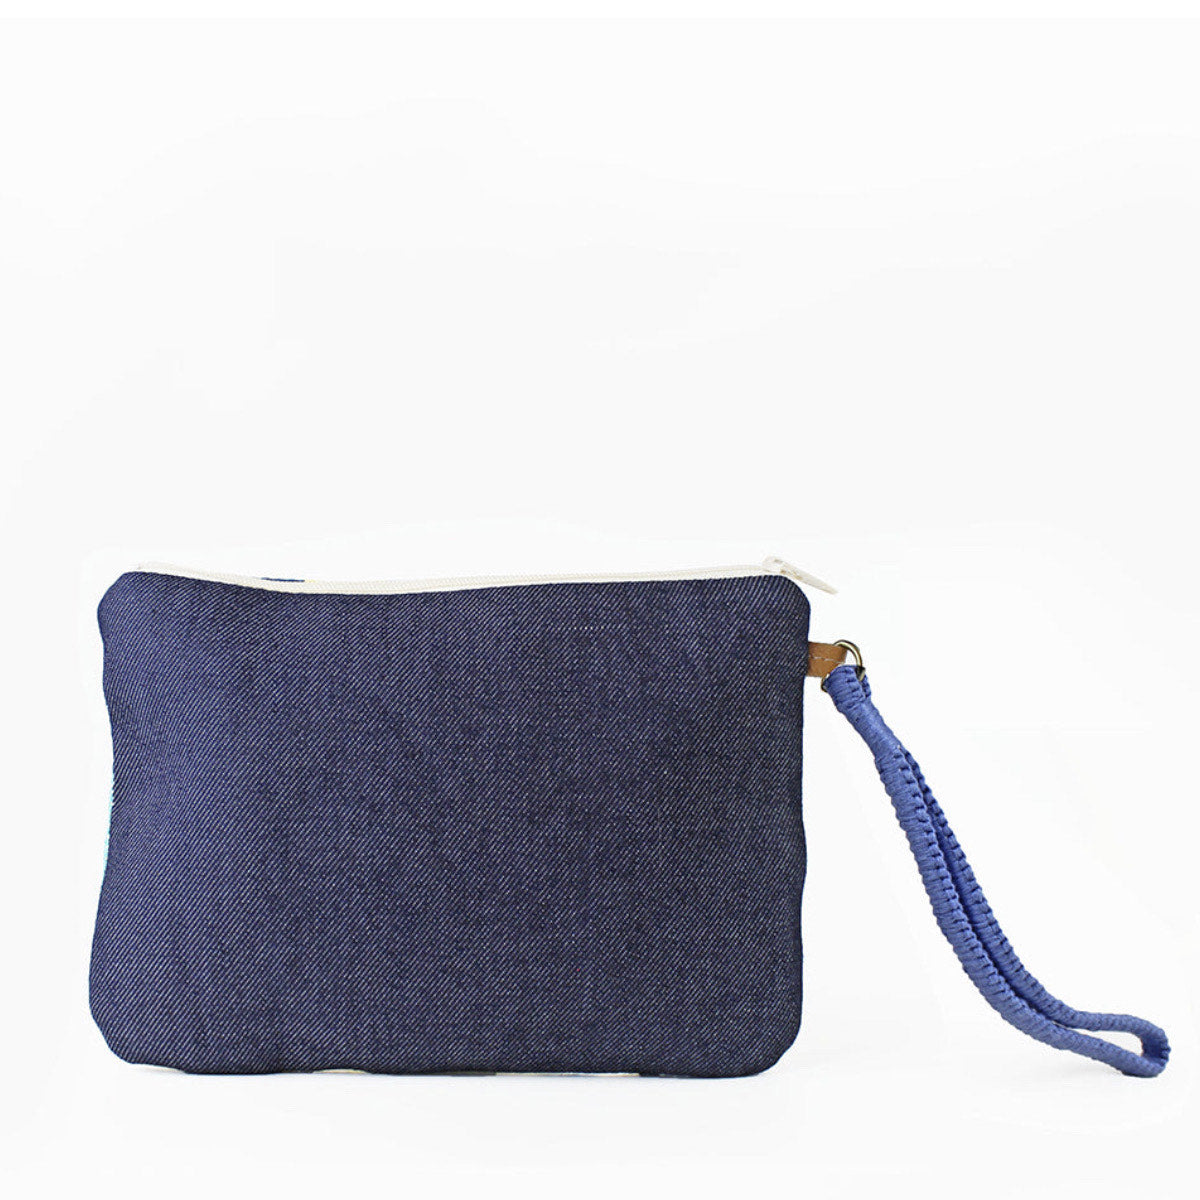 Back of the hand woven artisan Mini Lily Wristlet Clutch in Denim Pacific. The back has a dark wash denim fabric. It has a woven blue hand strap.